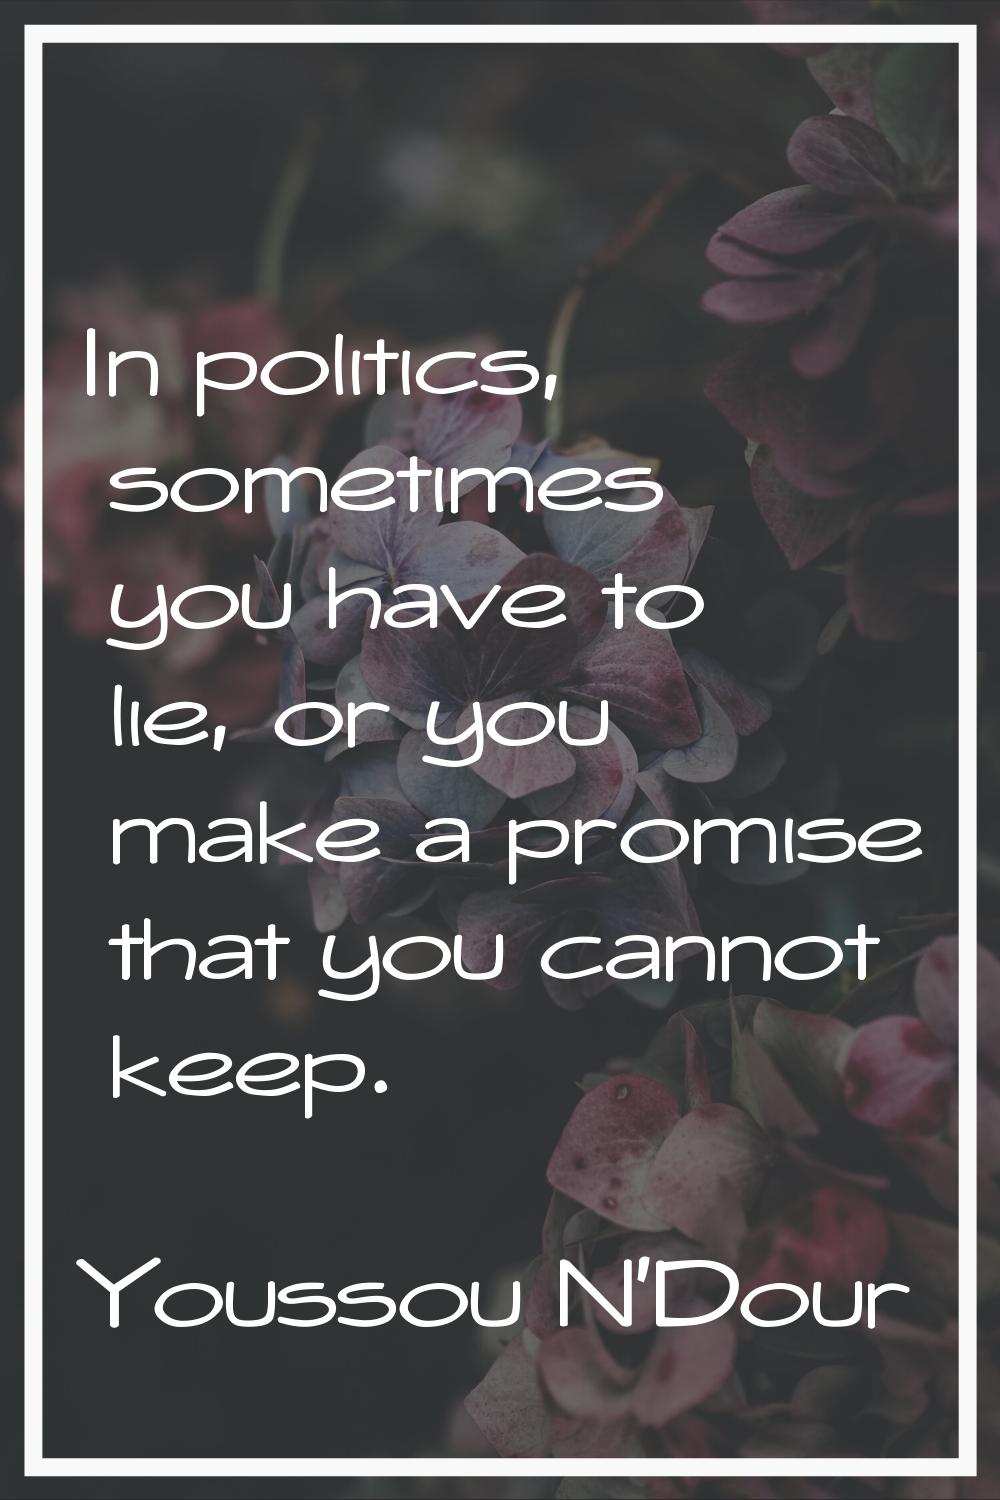 In politics, sometimes you have to lie, or you make a promise that you cannot keep.